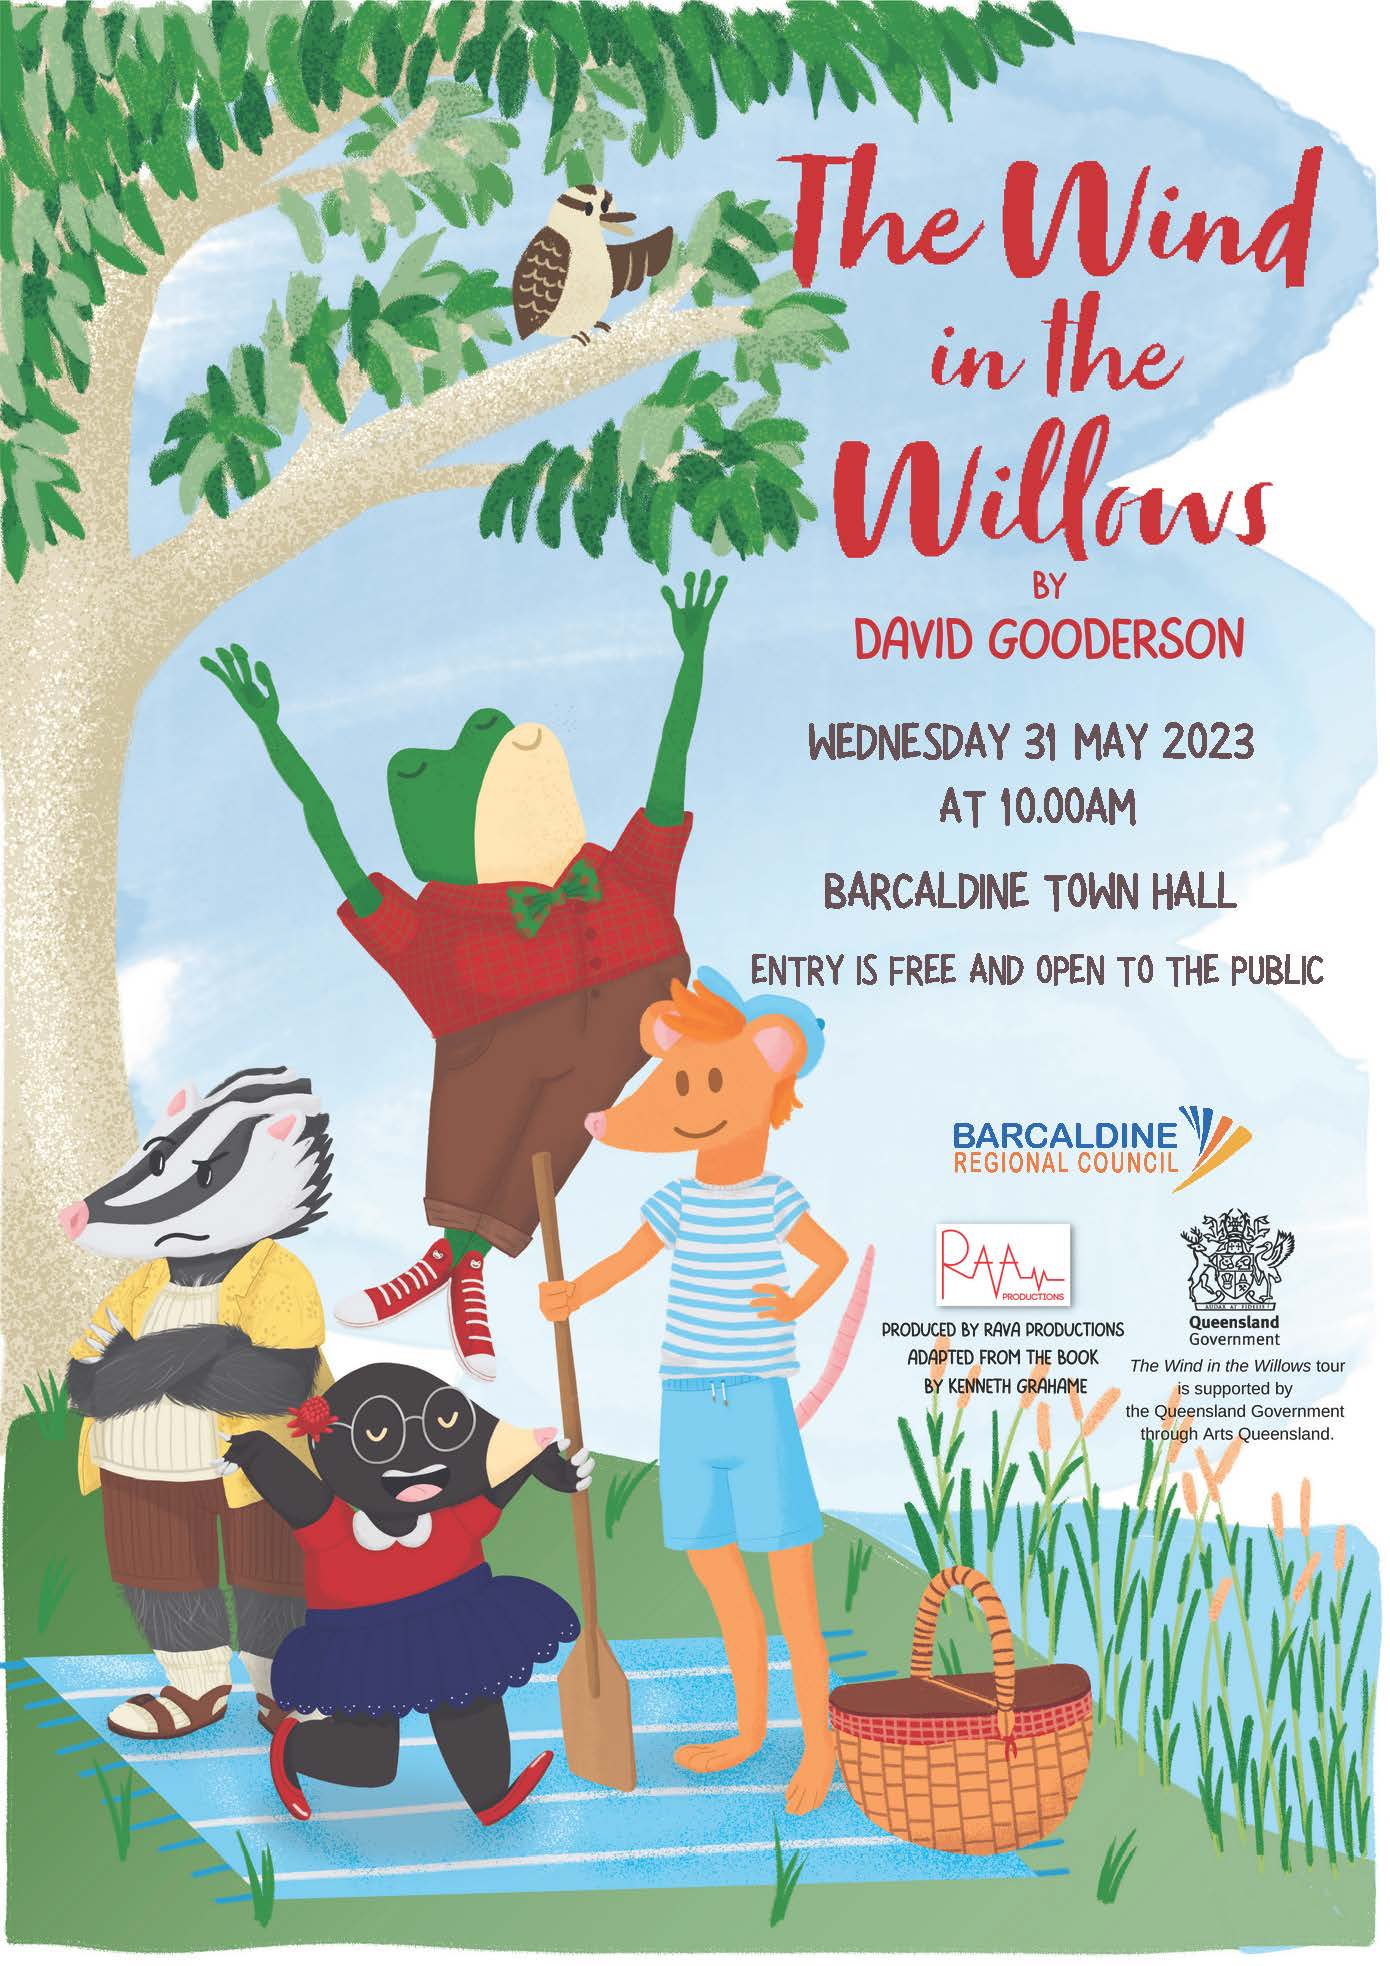 Barcaldine the wind in the willows production pdf